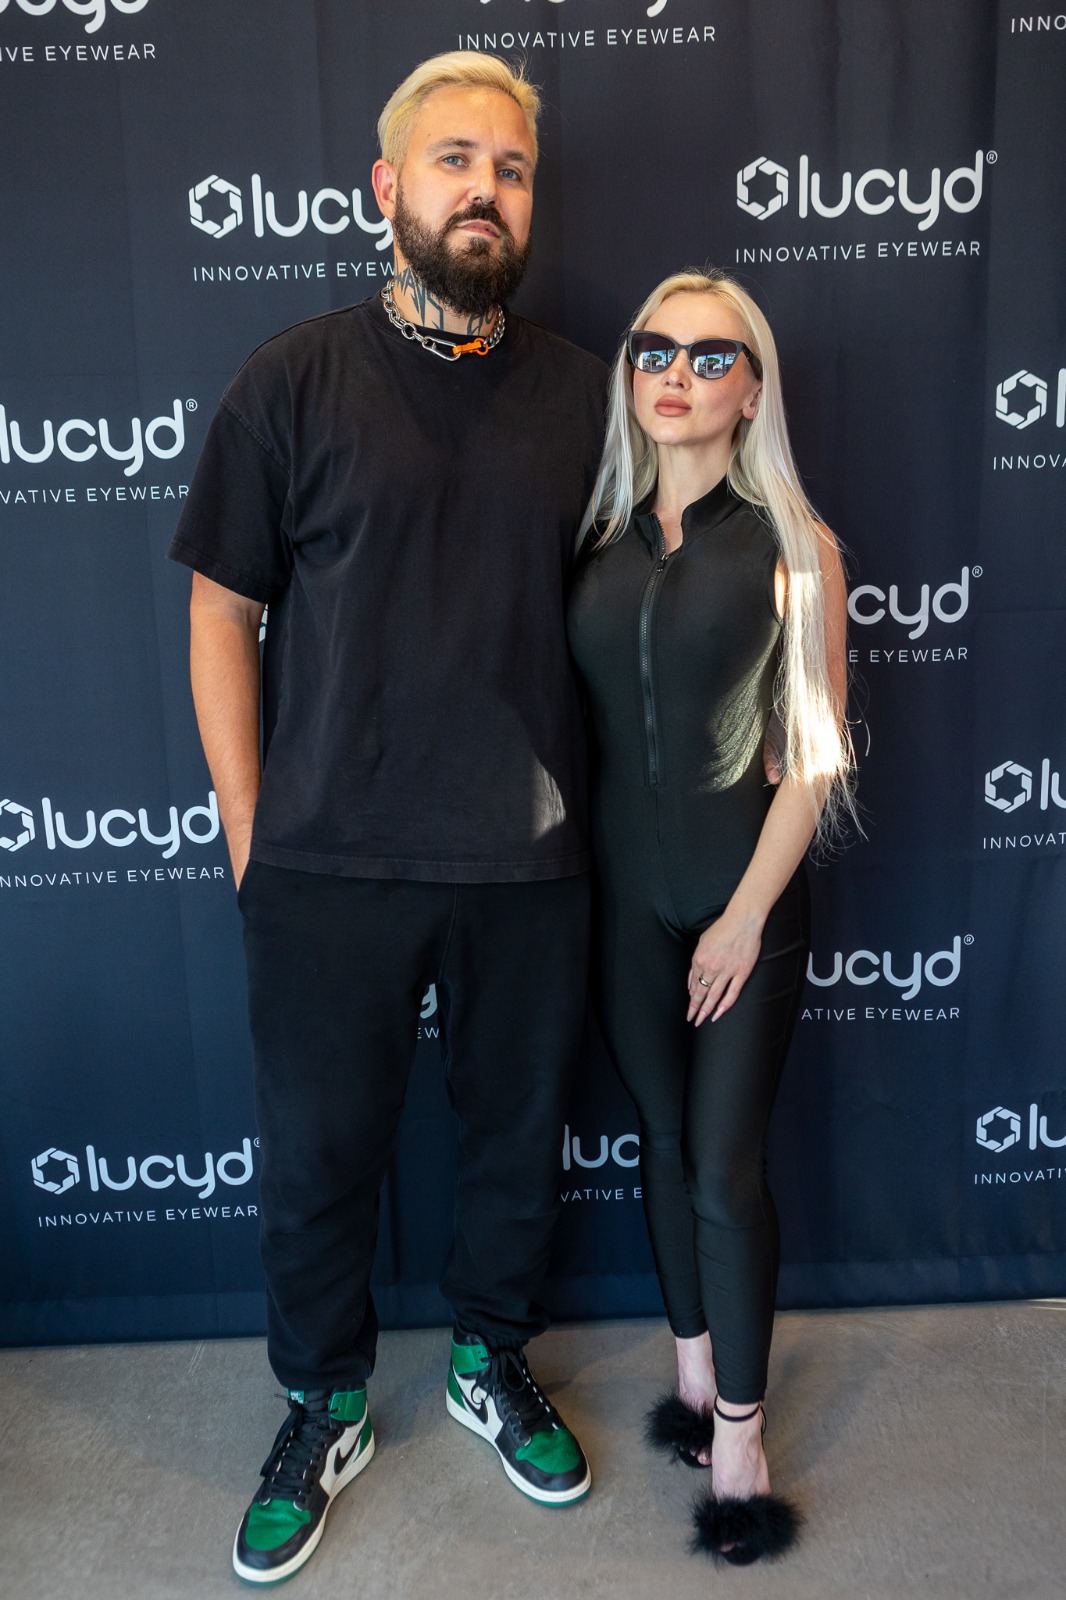 lisa and pylyp at lucyd 2.0 spring collection launch event